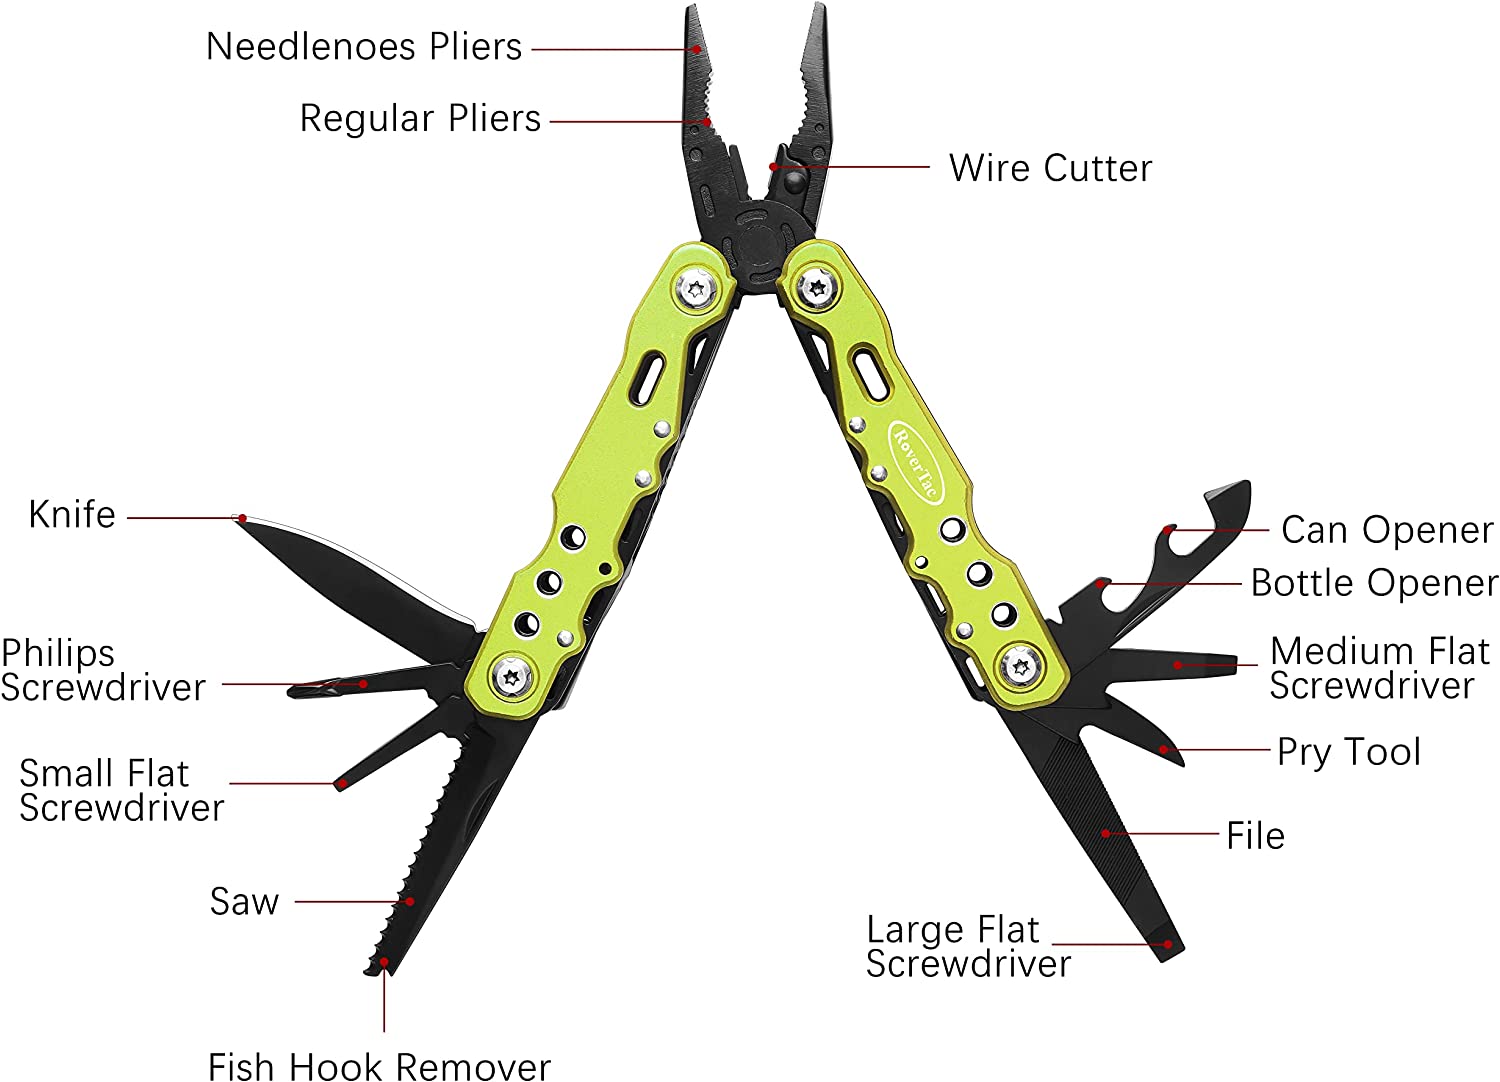 Gifts for Men Dad Husband Gifts for Him Birthday Gifts Unique Mens gifts Ideas RoverTac 14 in 1 Multitool Knife Pliers Screwdrivers Saw Bottle Opener Perfect for Camping Survival Hiking Repairs